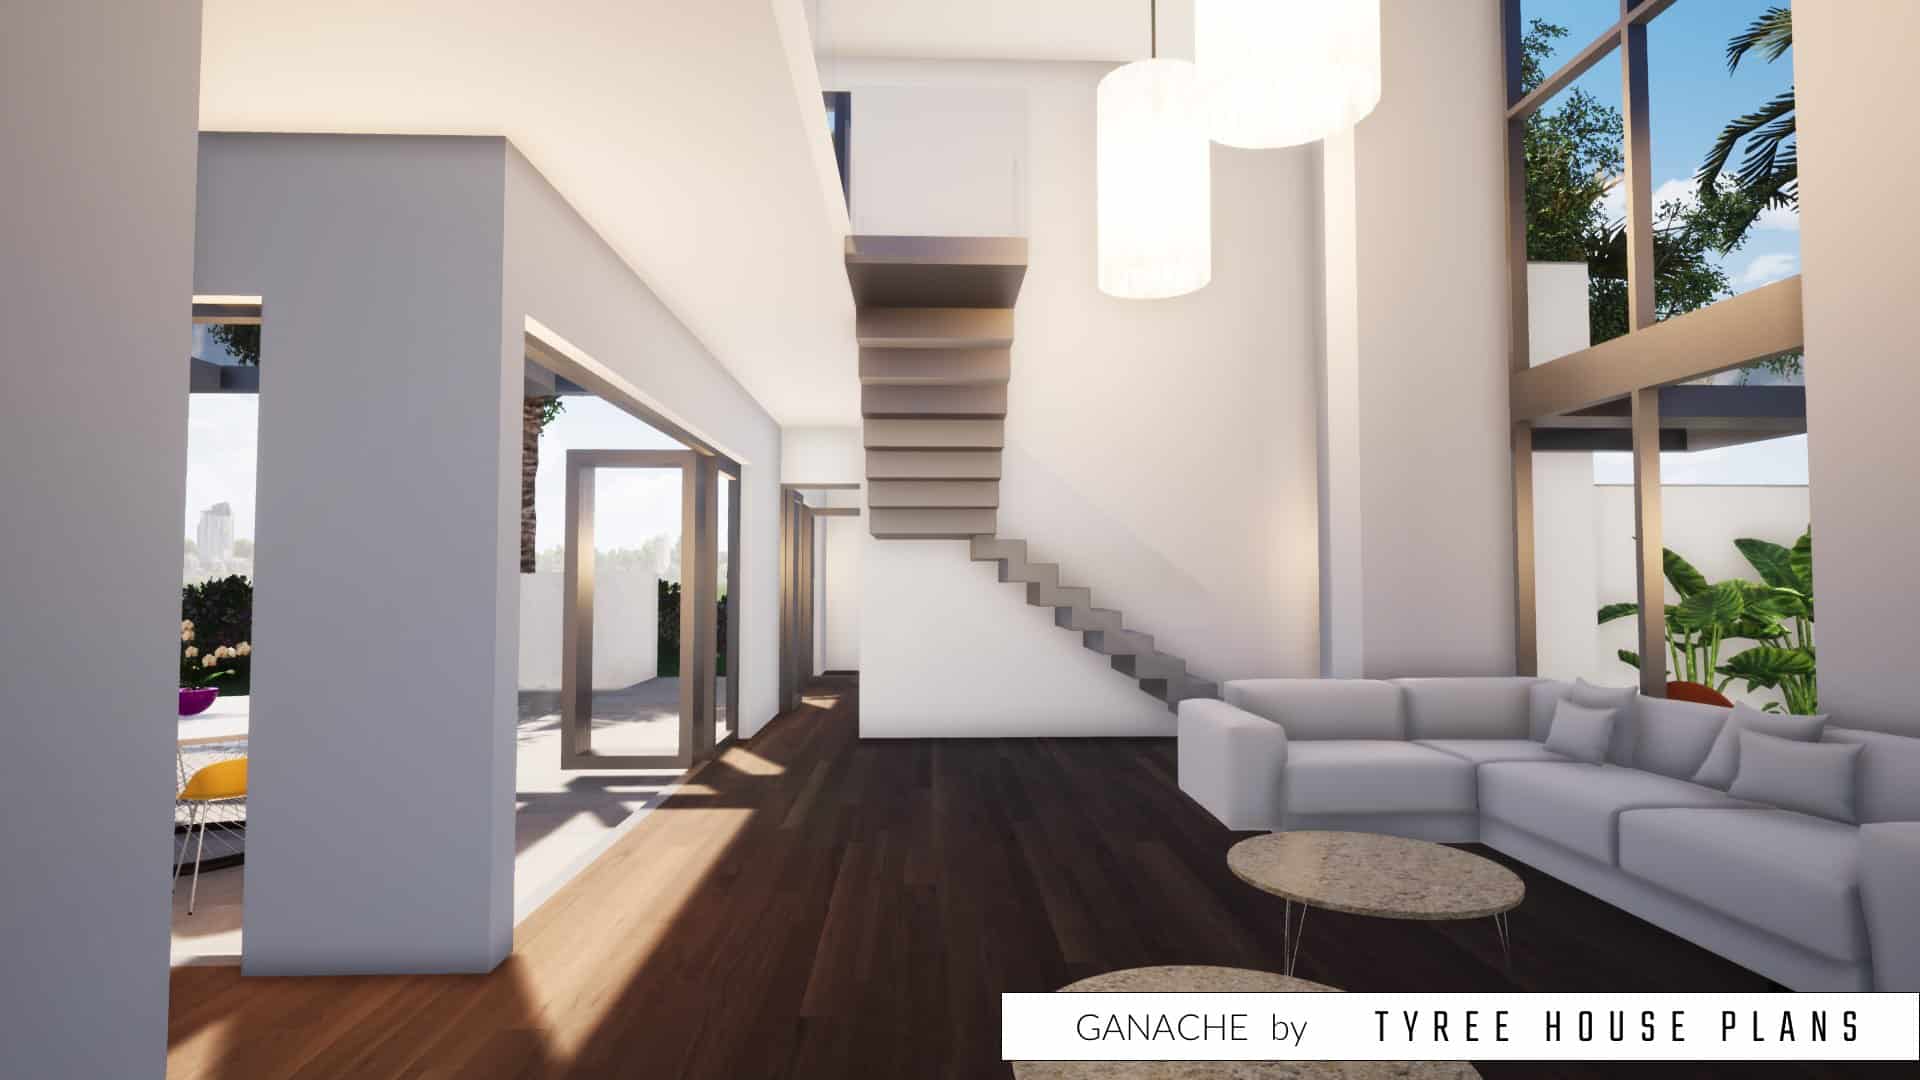 Floating stairs. Ganache by Tyree House Plans.